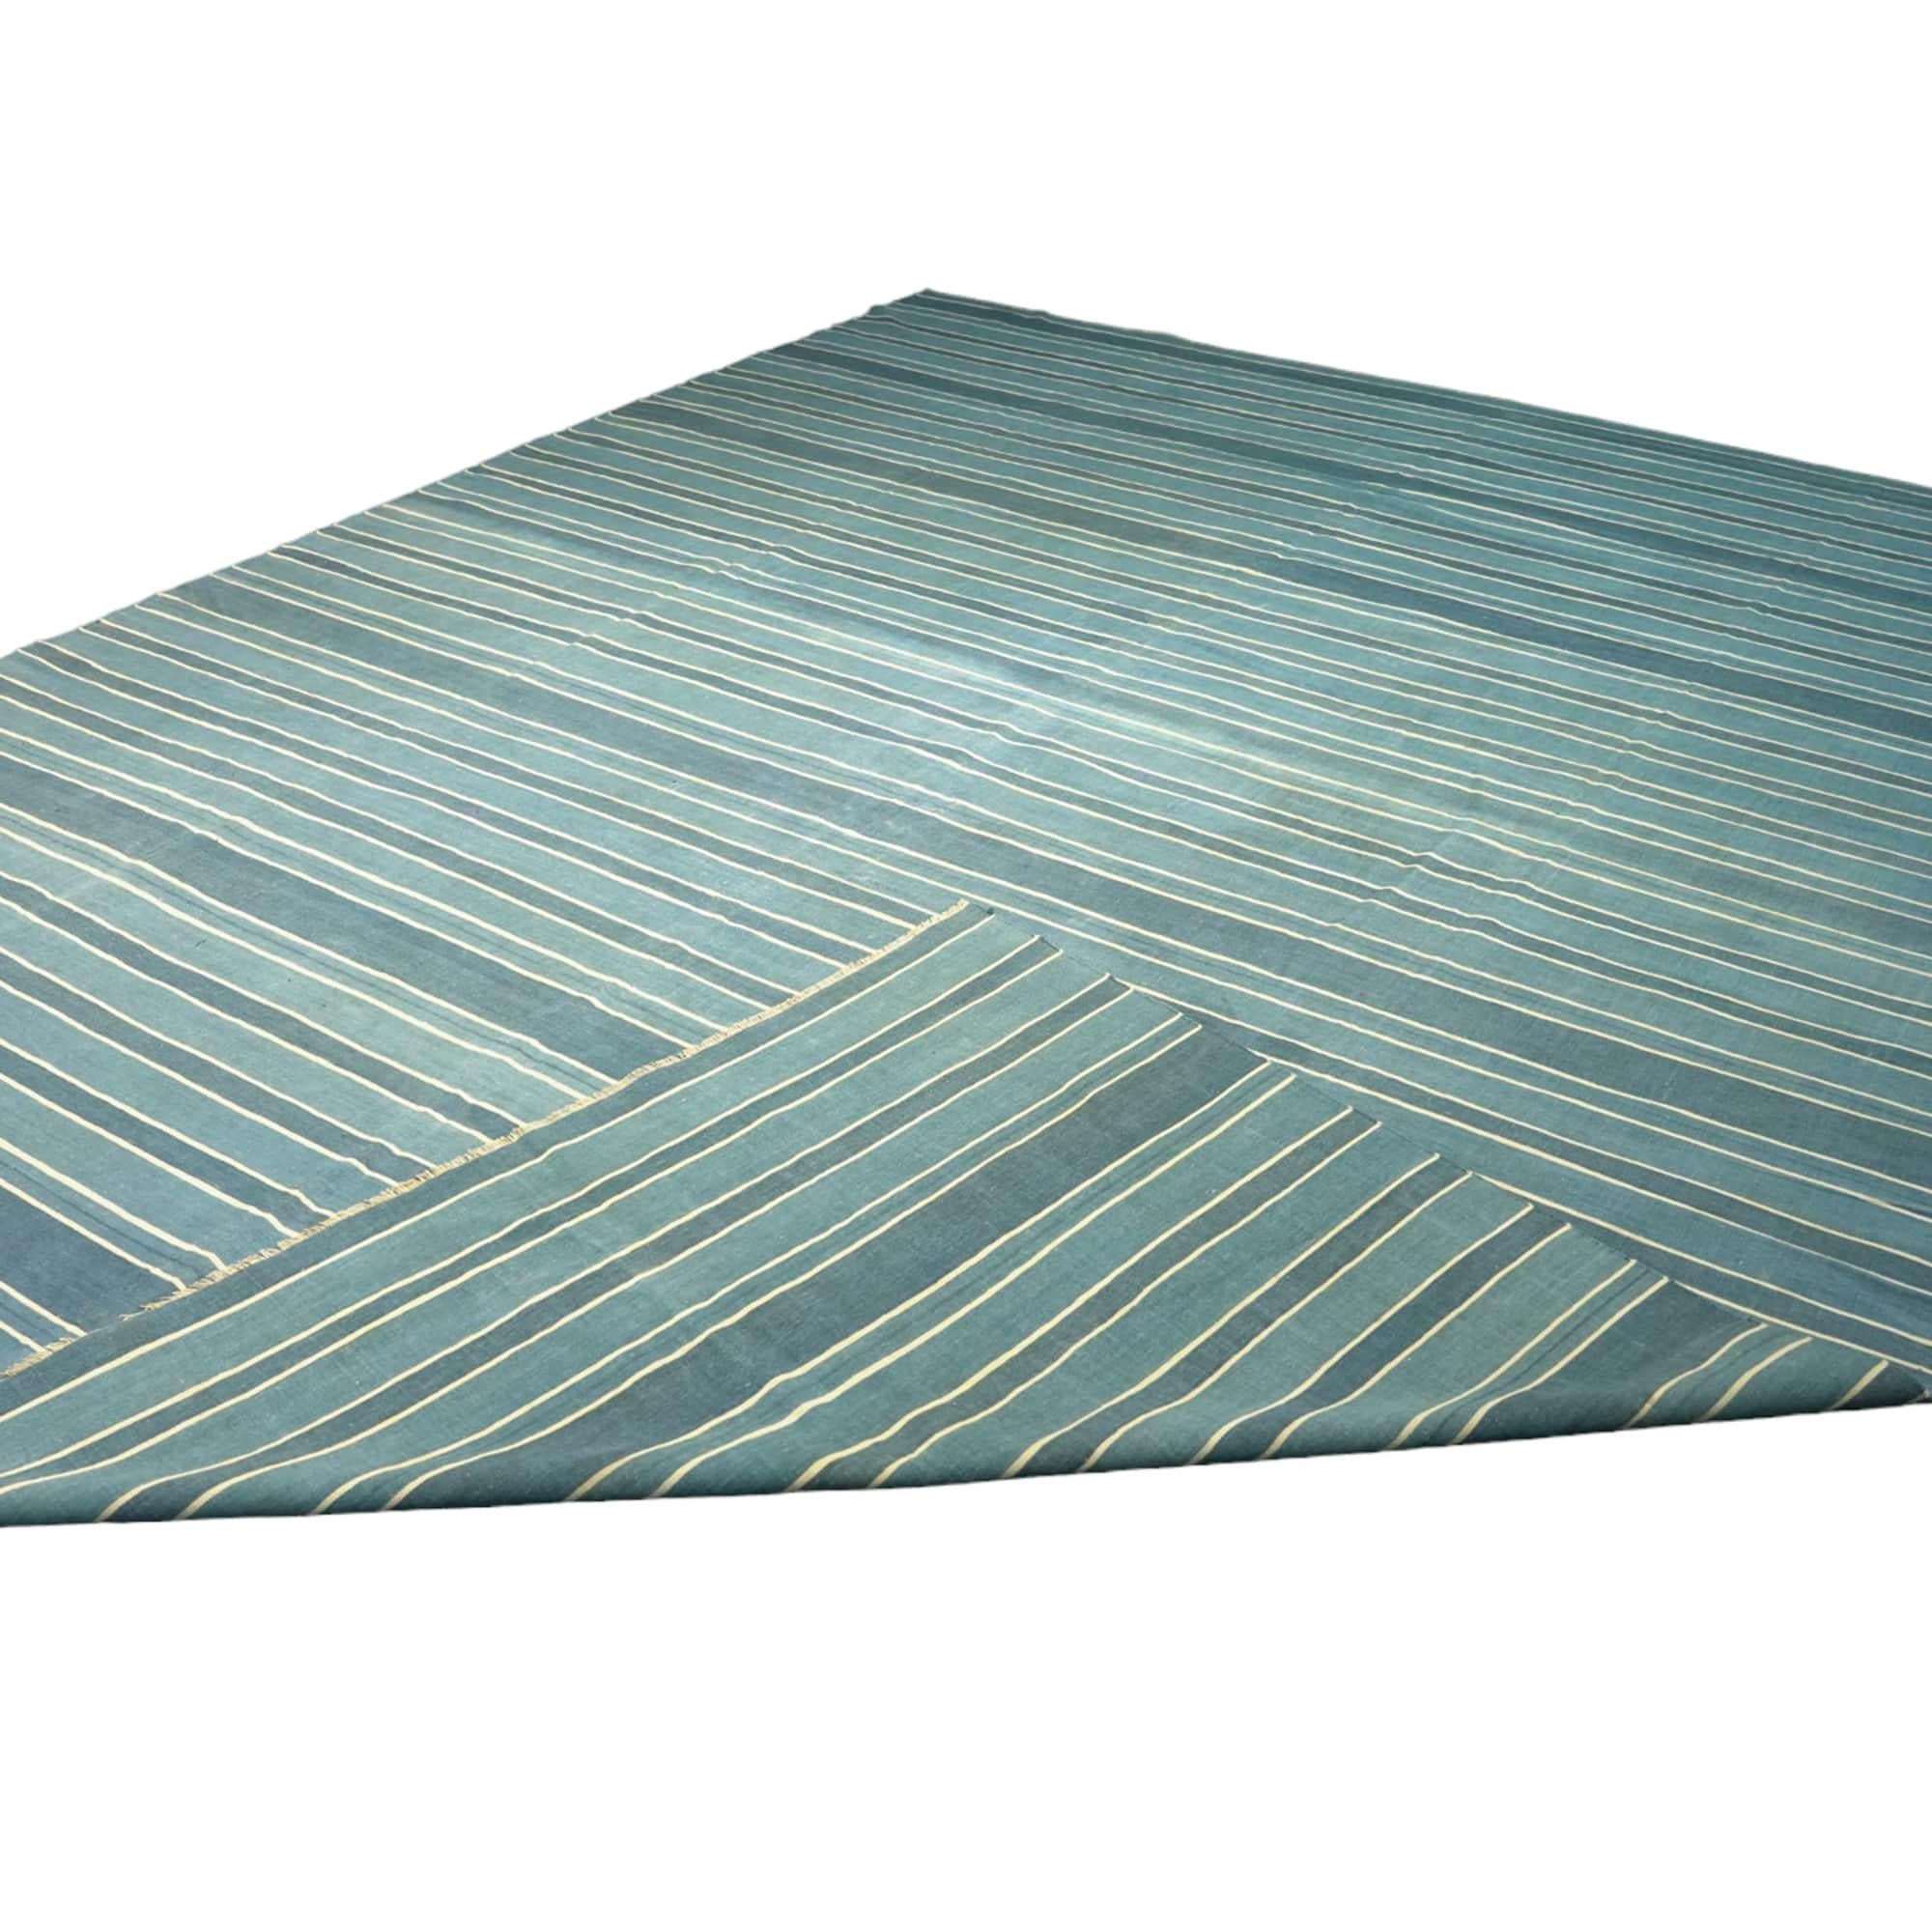 Indian Vintage Dhurrie Rug in Bluewith Stripes, from Rug & Kilim For Sale